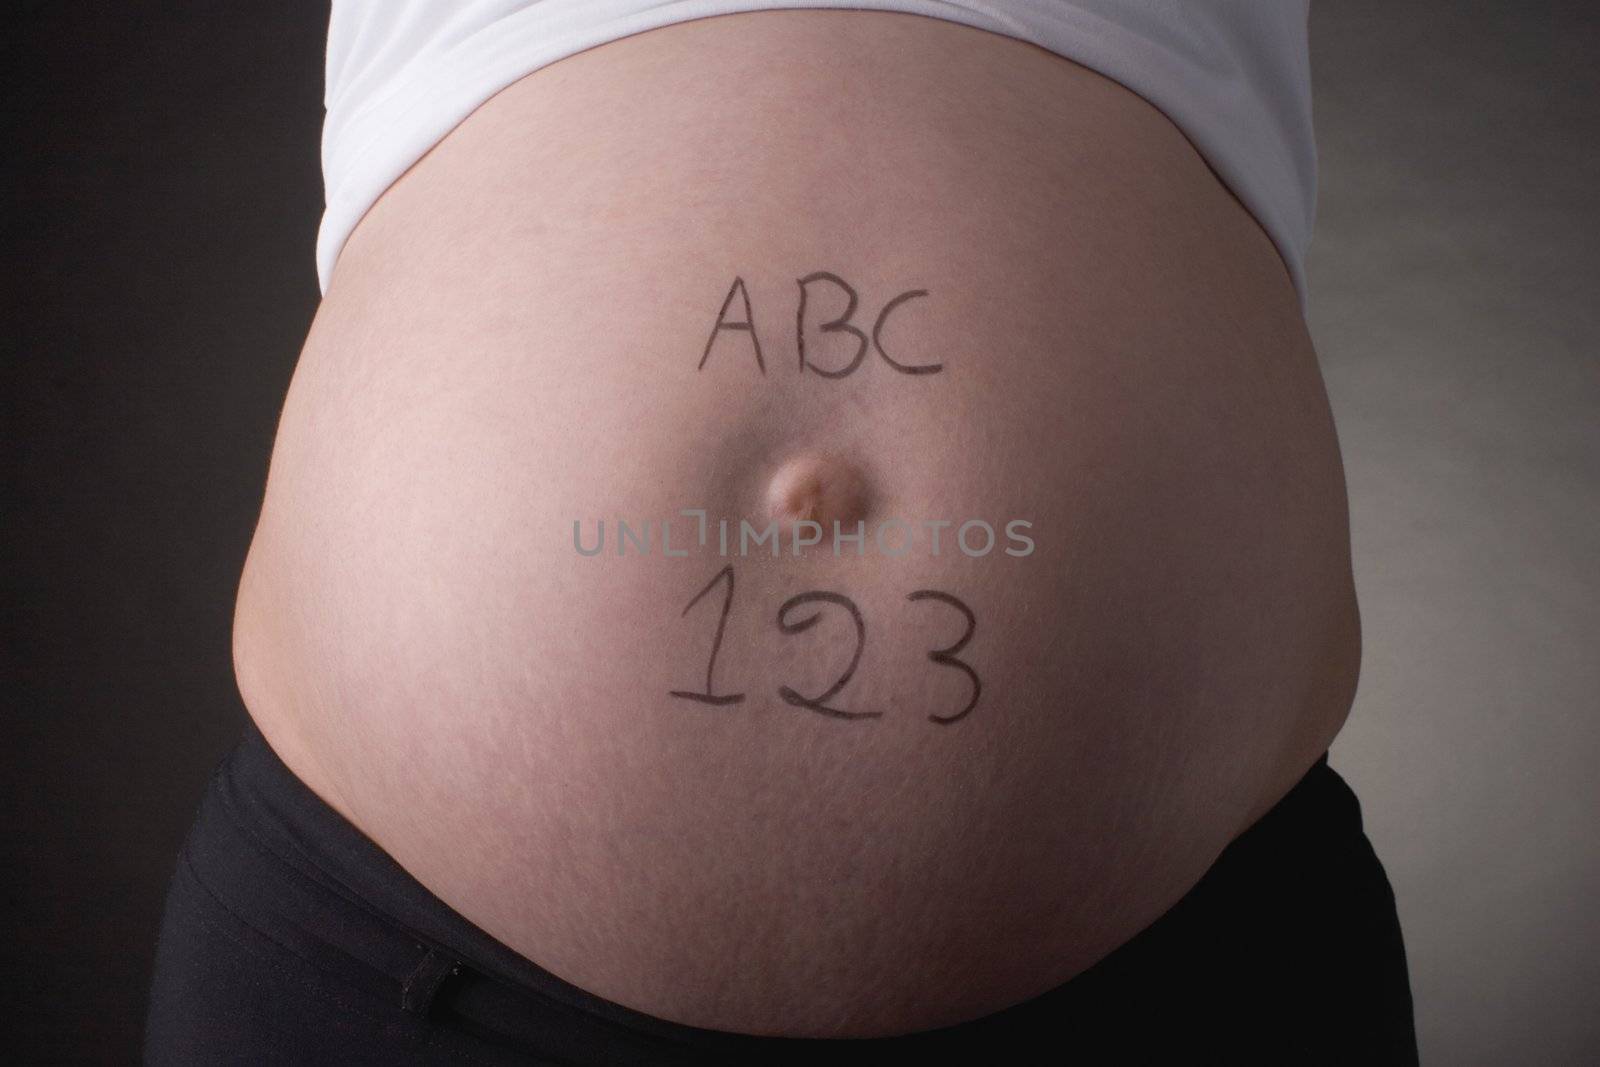 ABC 123 belly by mypstudio